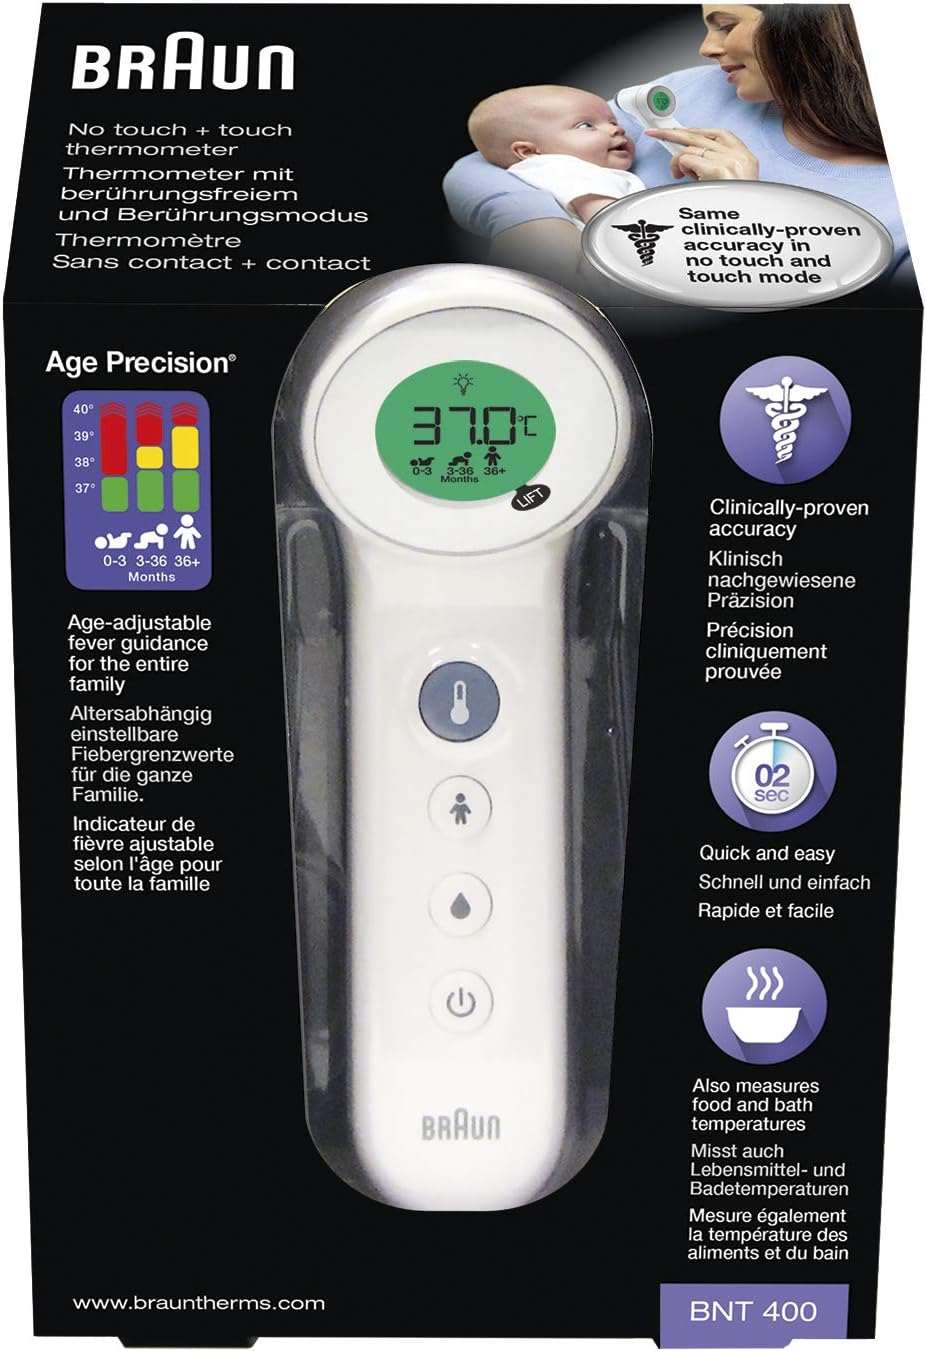 Braun No touch + touch Thermometer